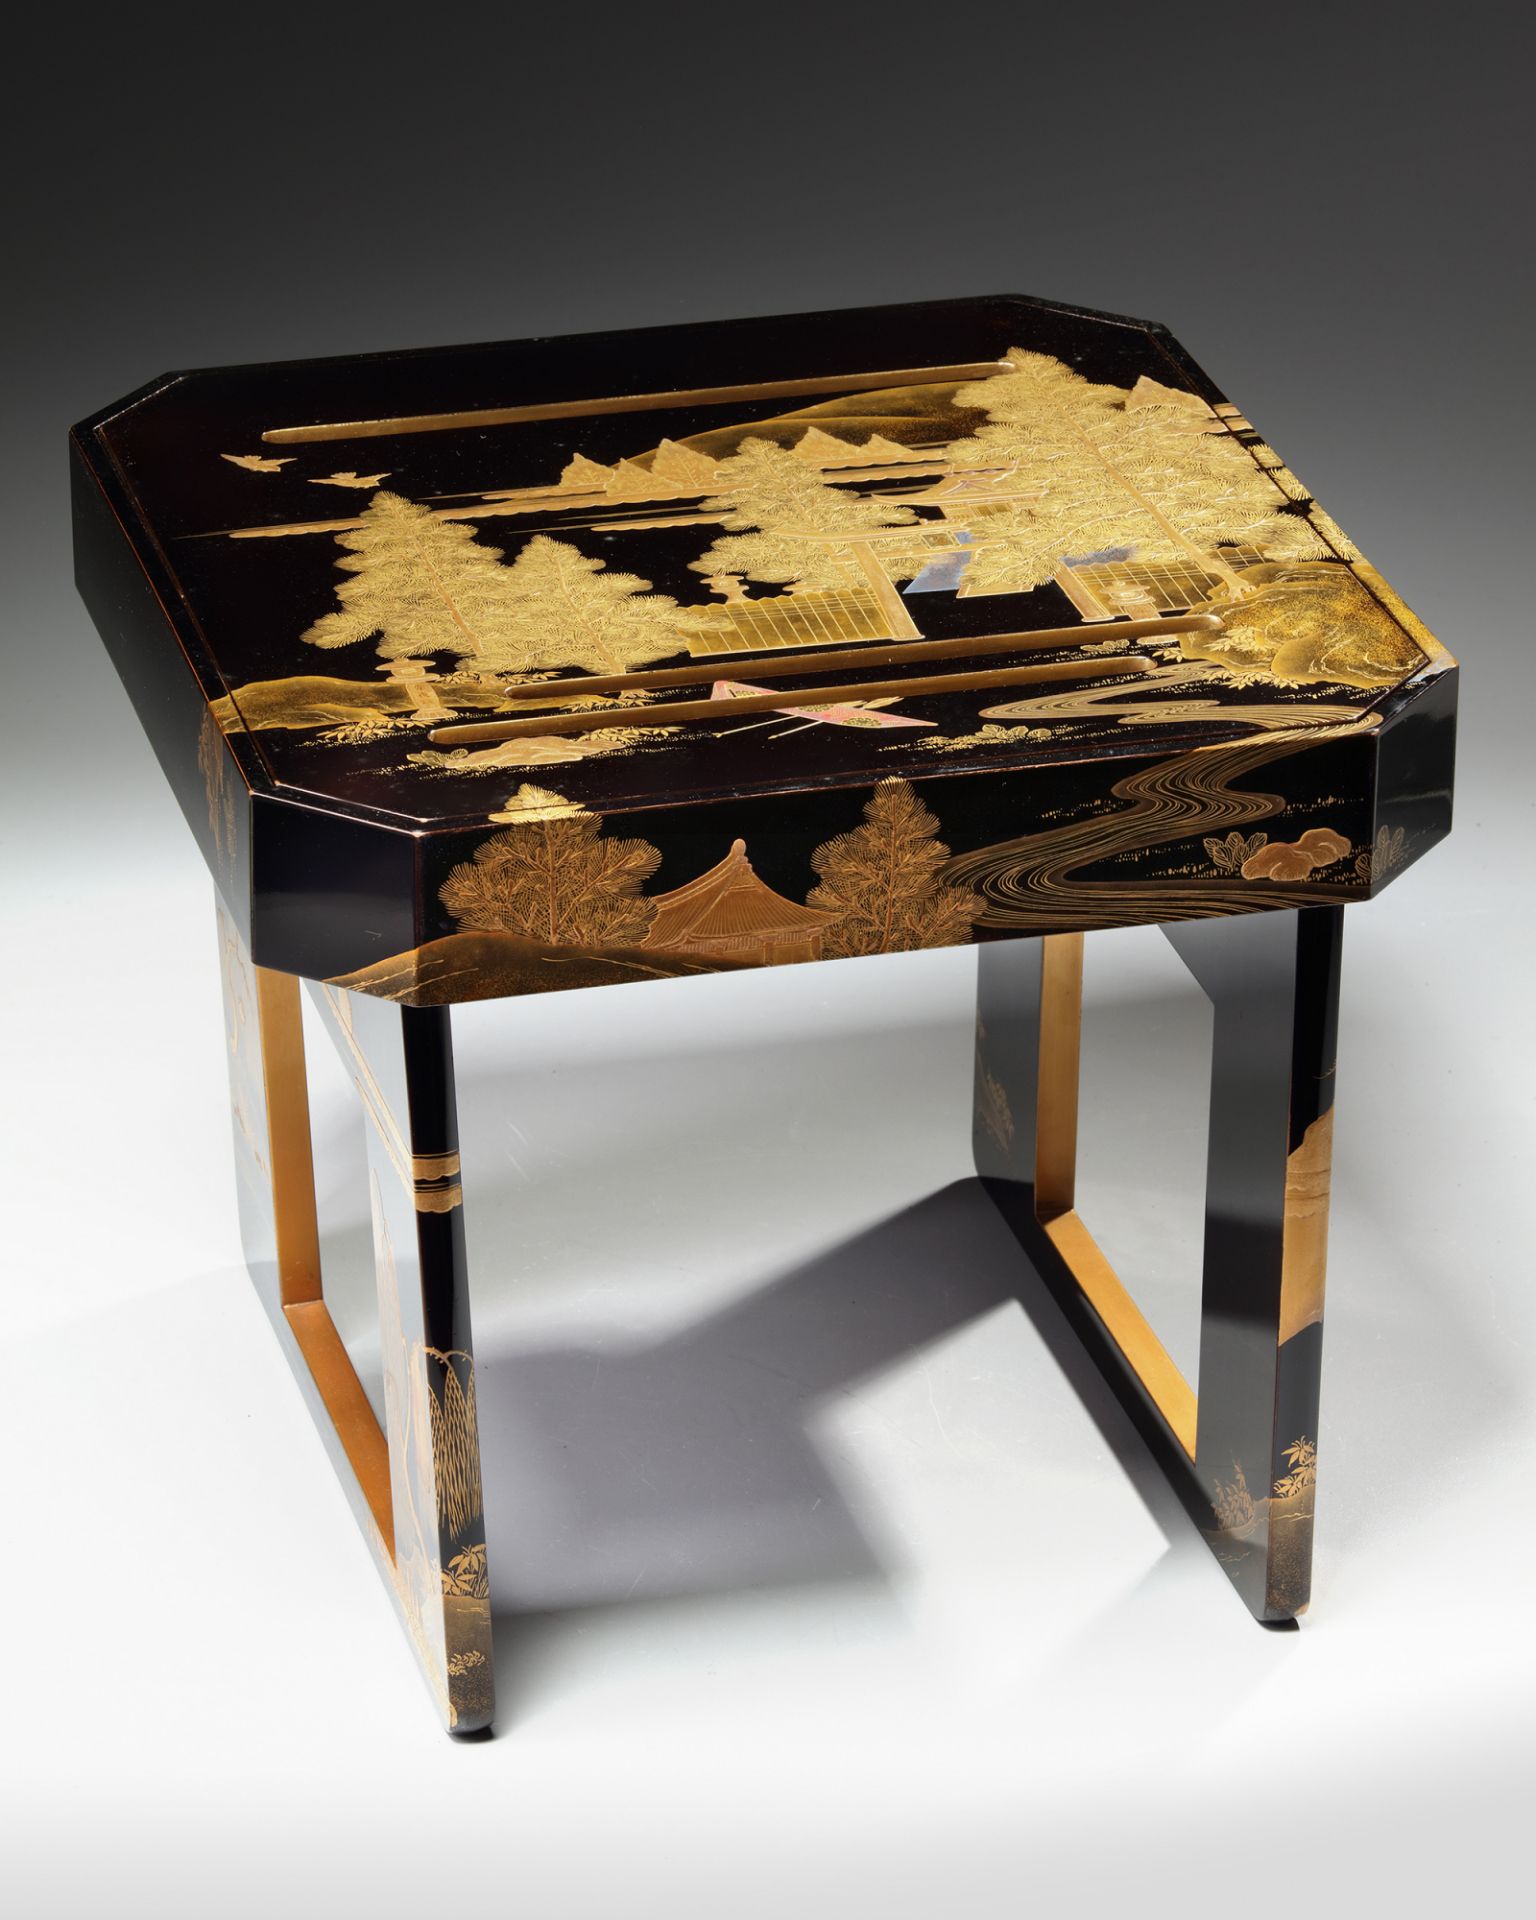 A JAPANESE SQUARE BLACK LACQUERED TABLE WITH A SEPARATE TRAY IN ITS TOP - Image 2 of 4